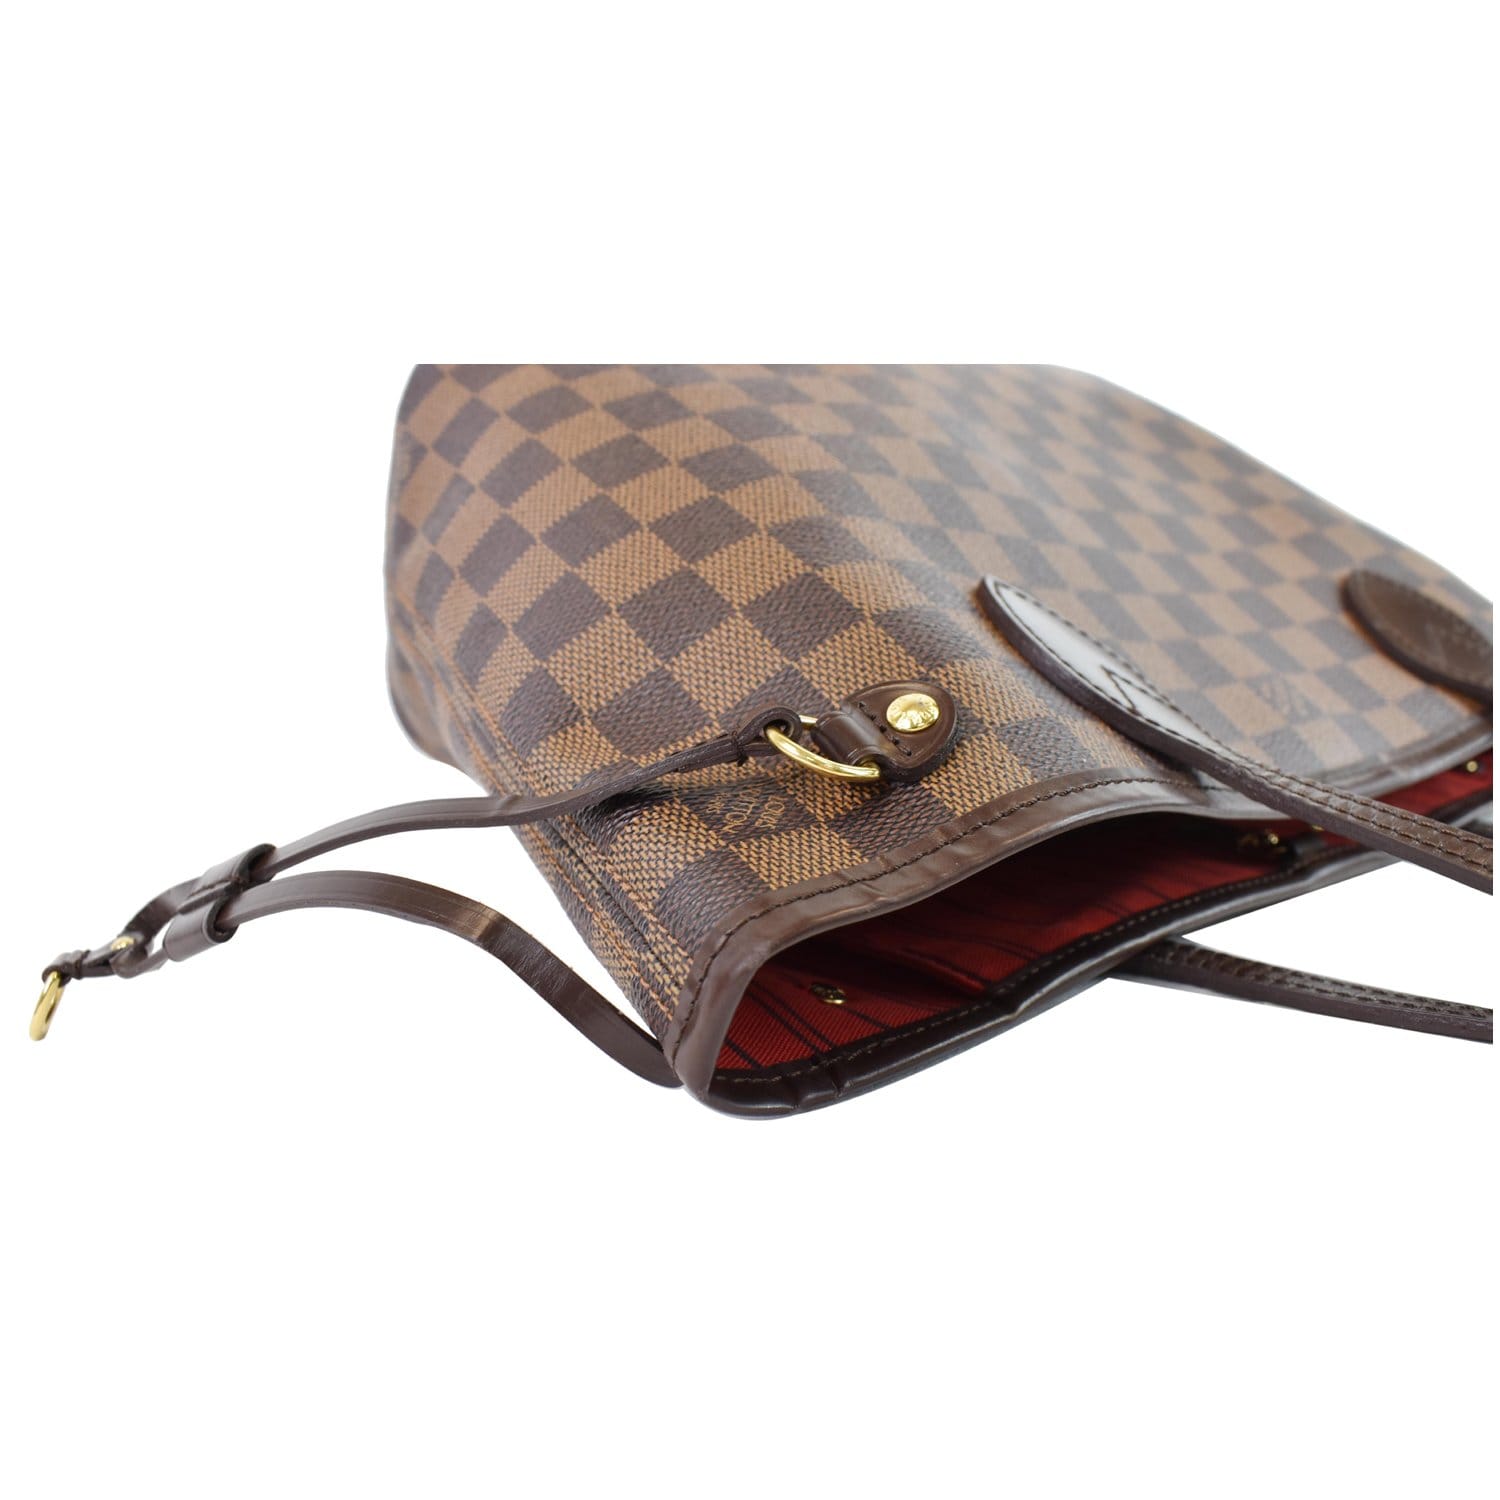 Louis Vuitton Neverfull Damier Ebene Pm 21l69 Brown Coated Canvas